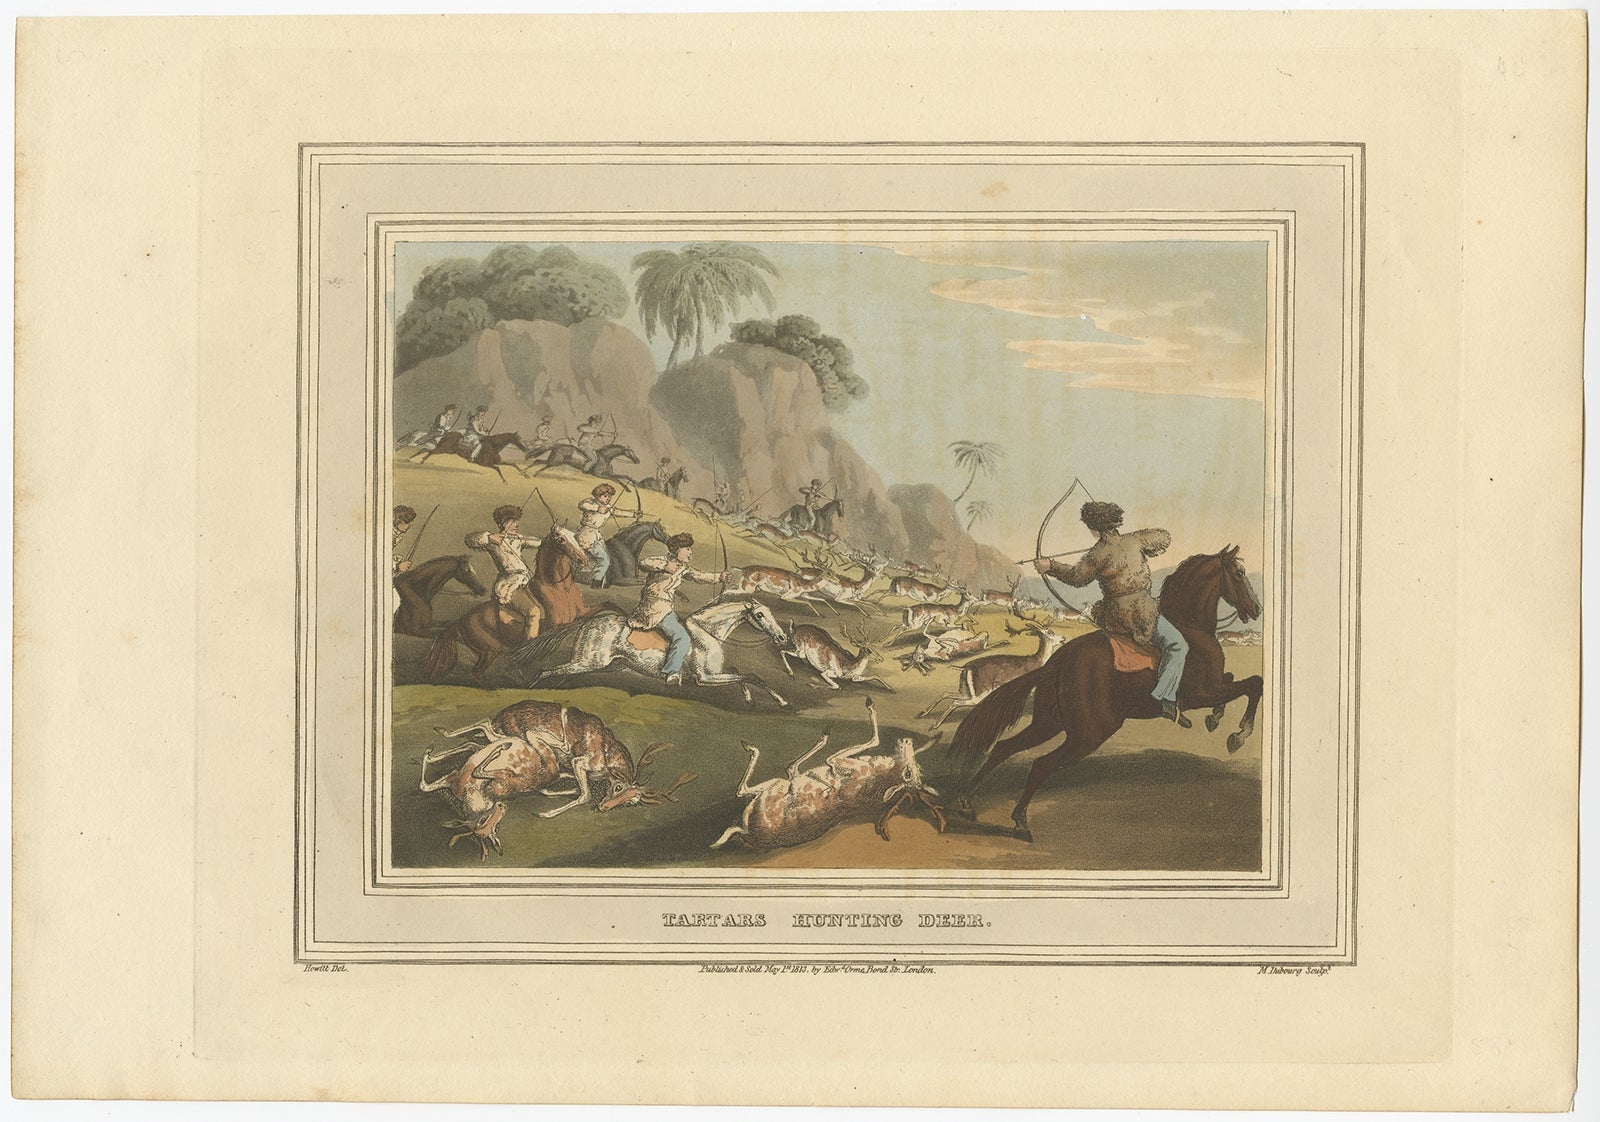 Antique print titled 'Tartars hunting deer'. This print originates from Samuel Howitt's 'Foreign Field Sports'.

Artists and Engravers: Samuel Howitt was an English painter, illustrator and etcher of animals, hunting, horse-racing and landscape